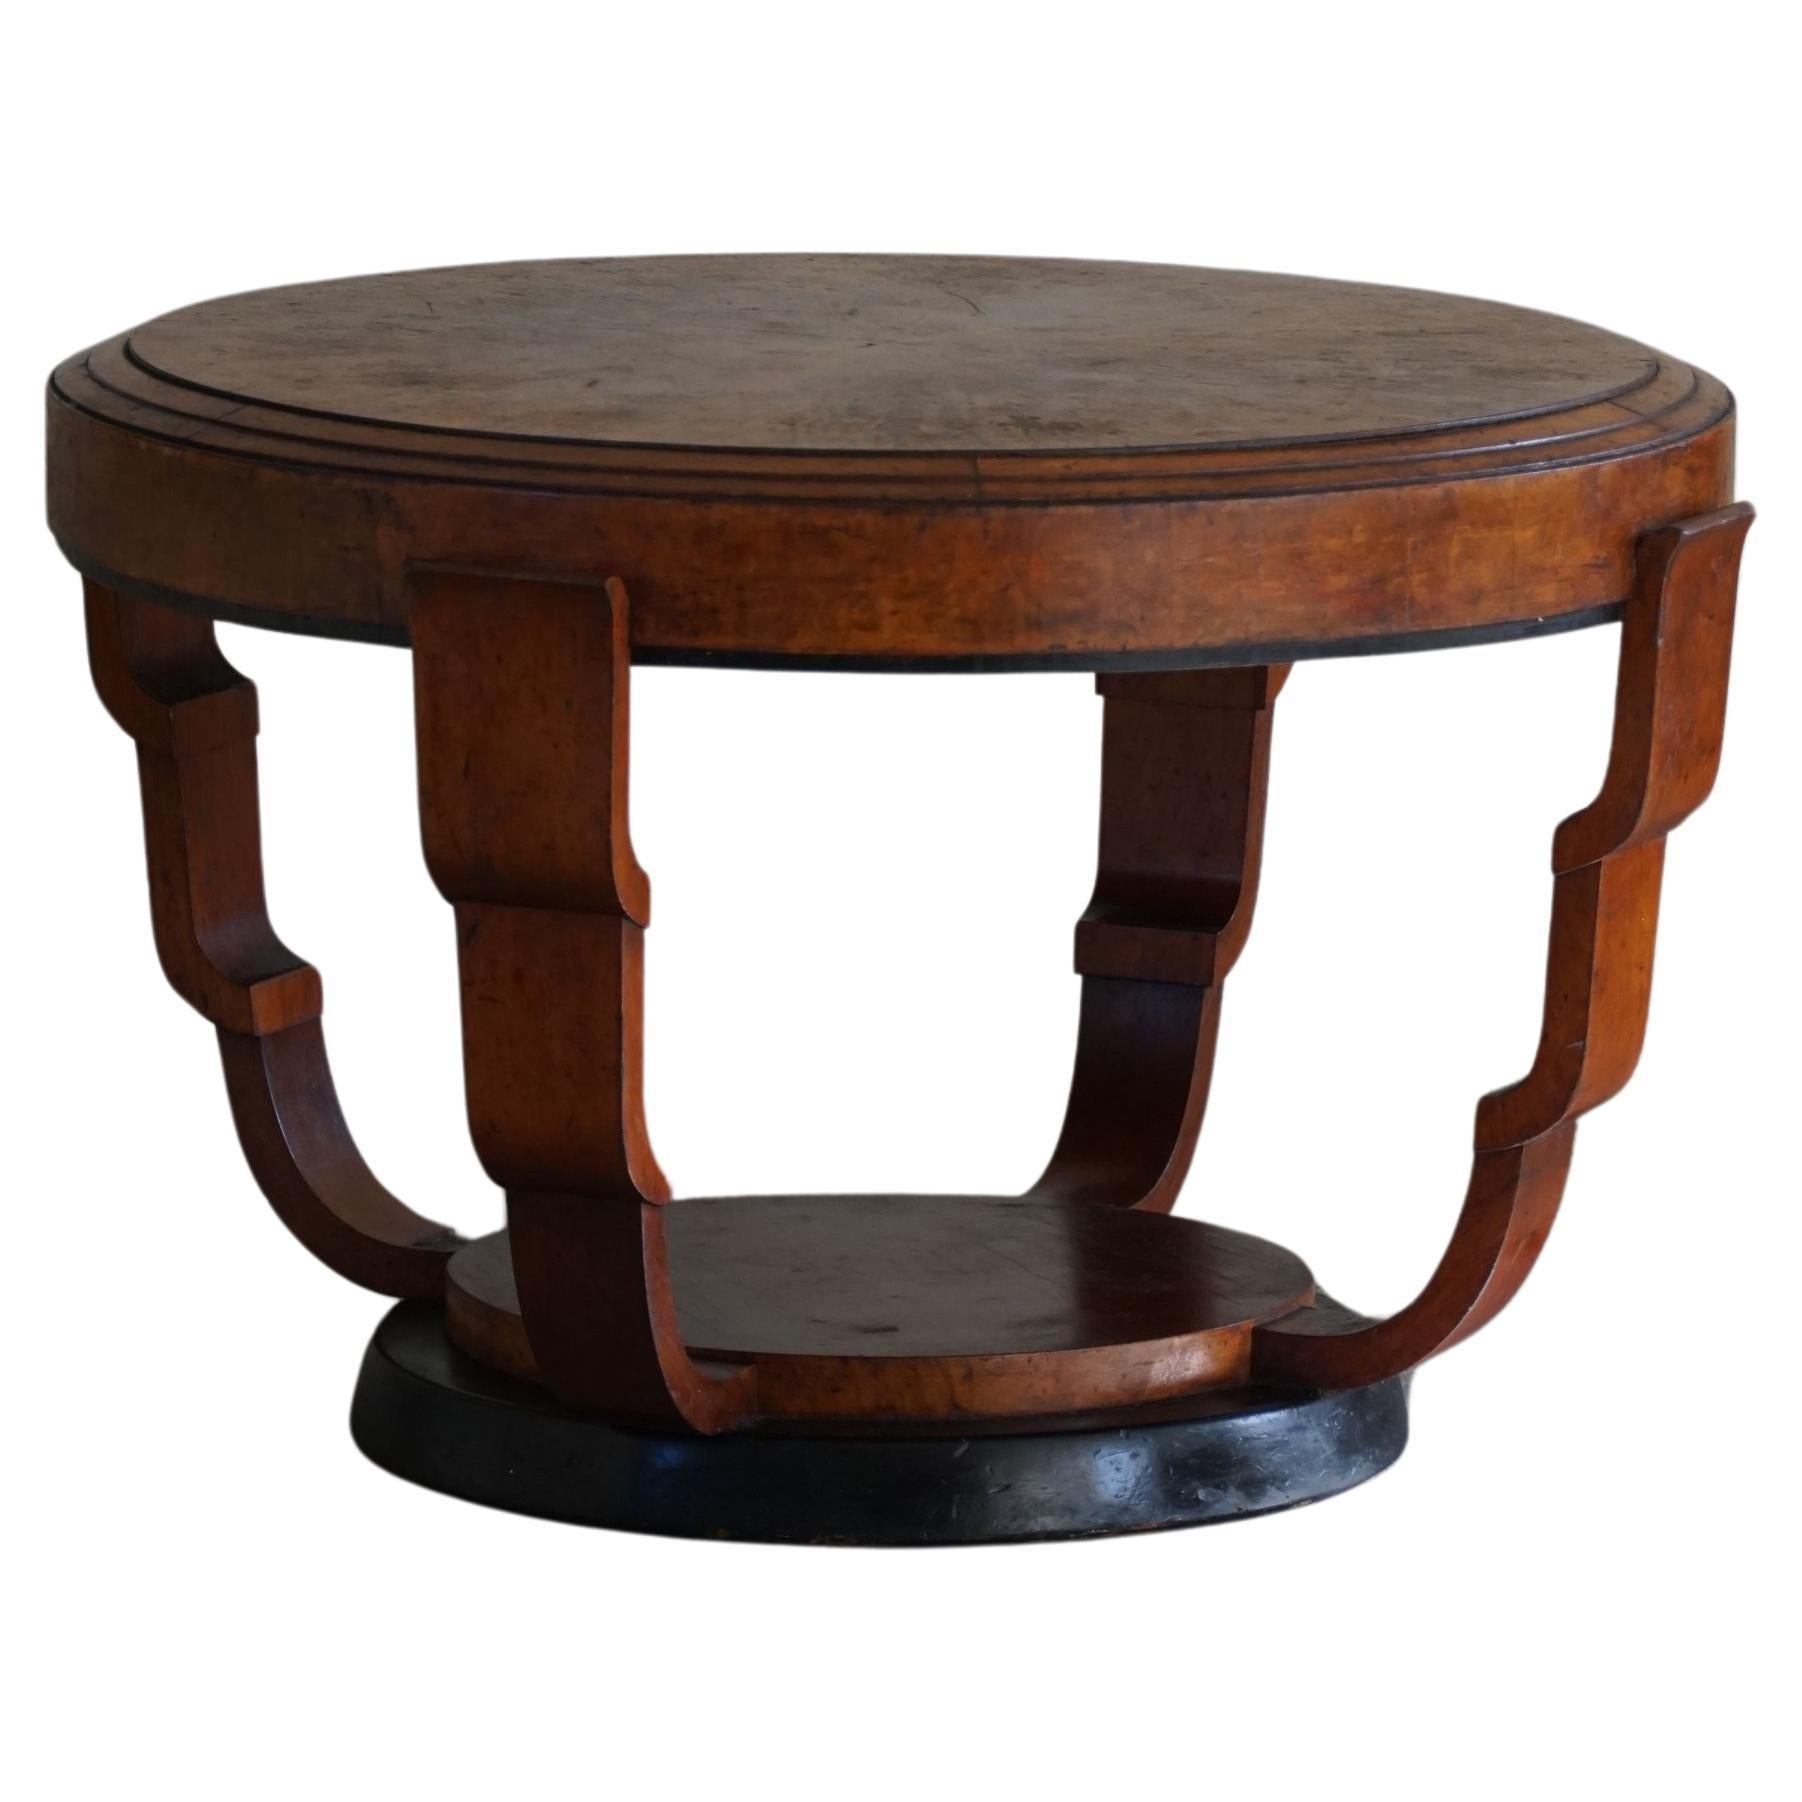 Art Deco, Large Round Sofa Table in Walnut, By a Danish Cabinetmaker, 1930s For Sale